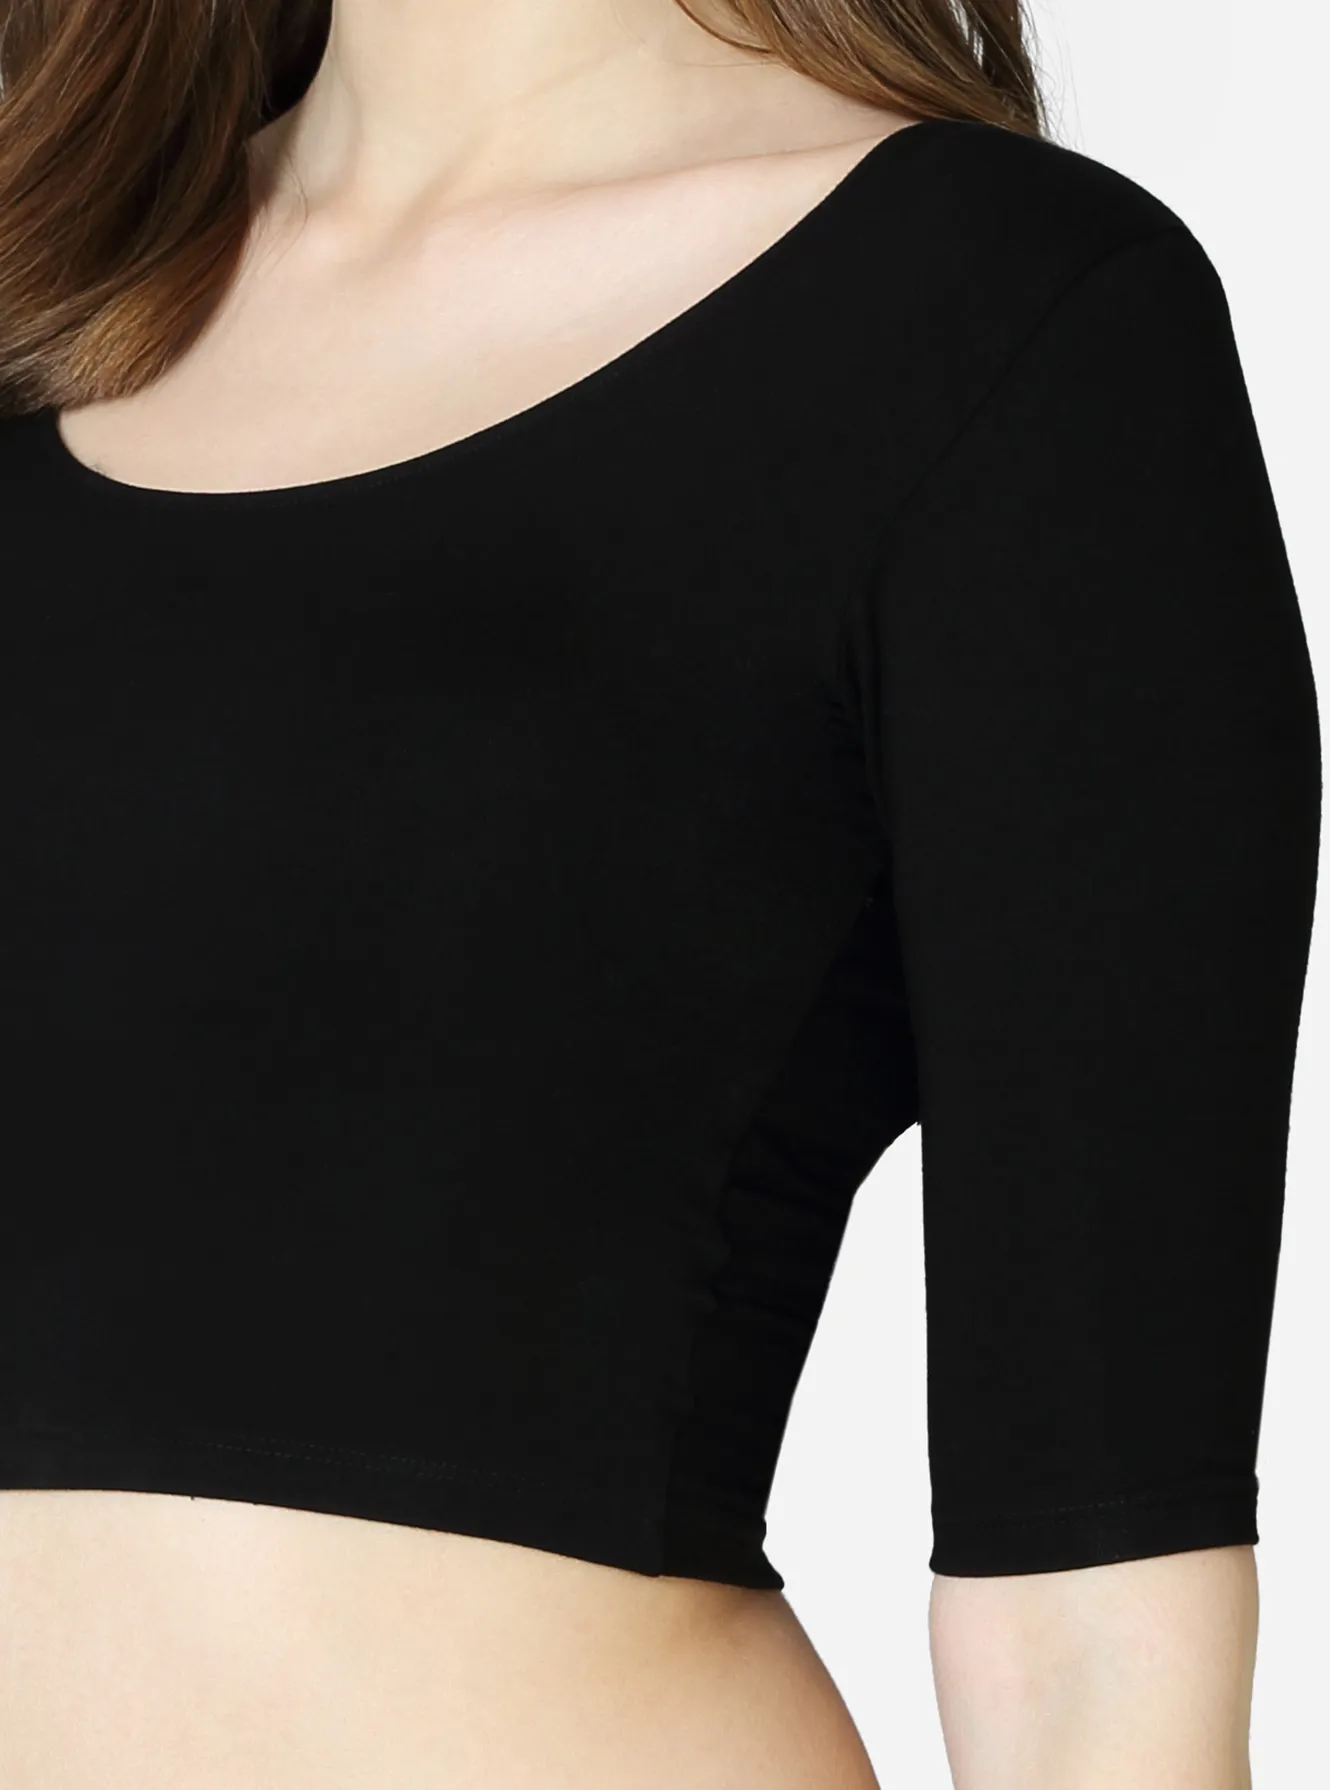 Deep front neck comfy blouse with keyhole back, Buy Mens & Kids Innerwear